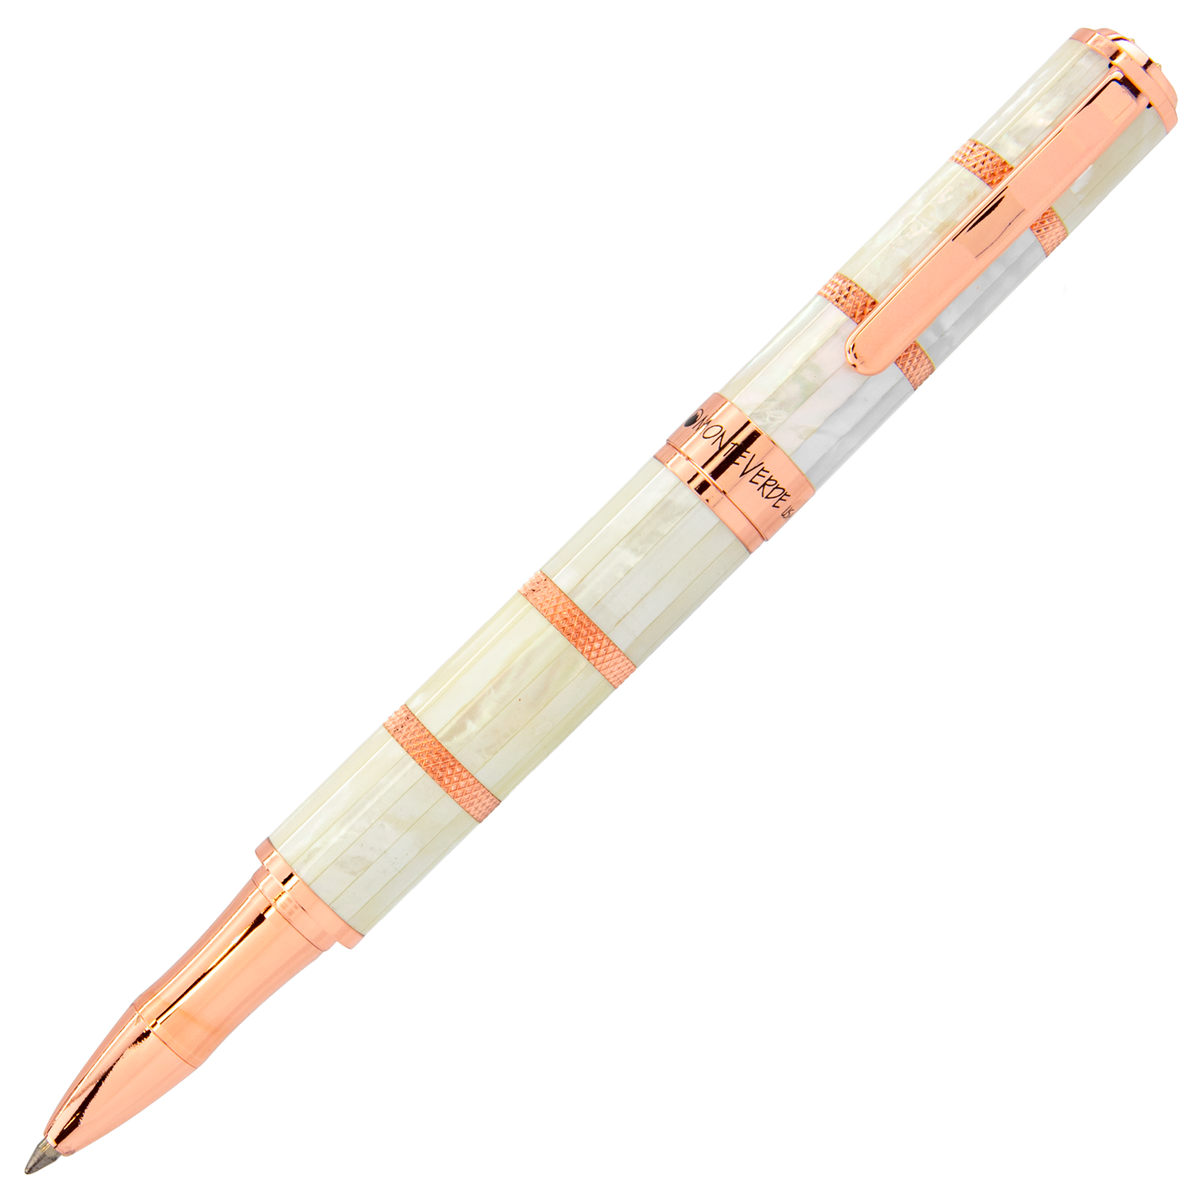 Monteverde Regatta Mother of Pearl w/ Rose Gold Trim Limited Edition Rollerball